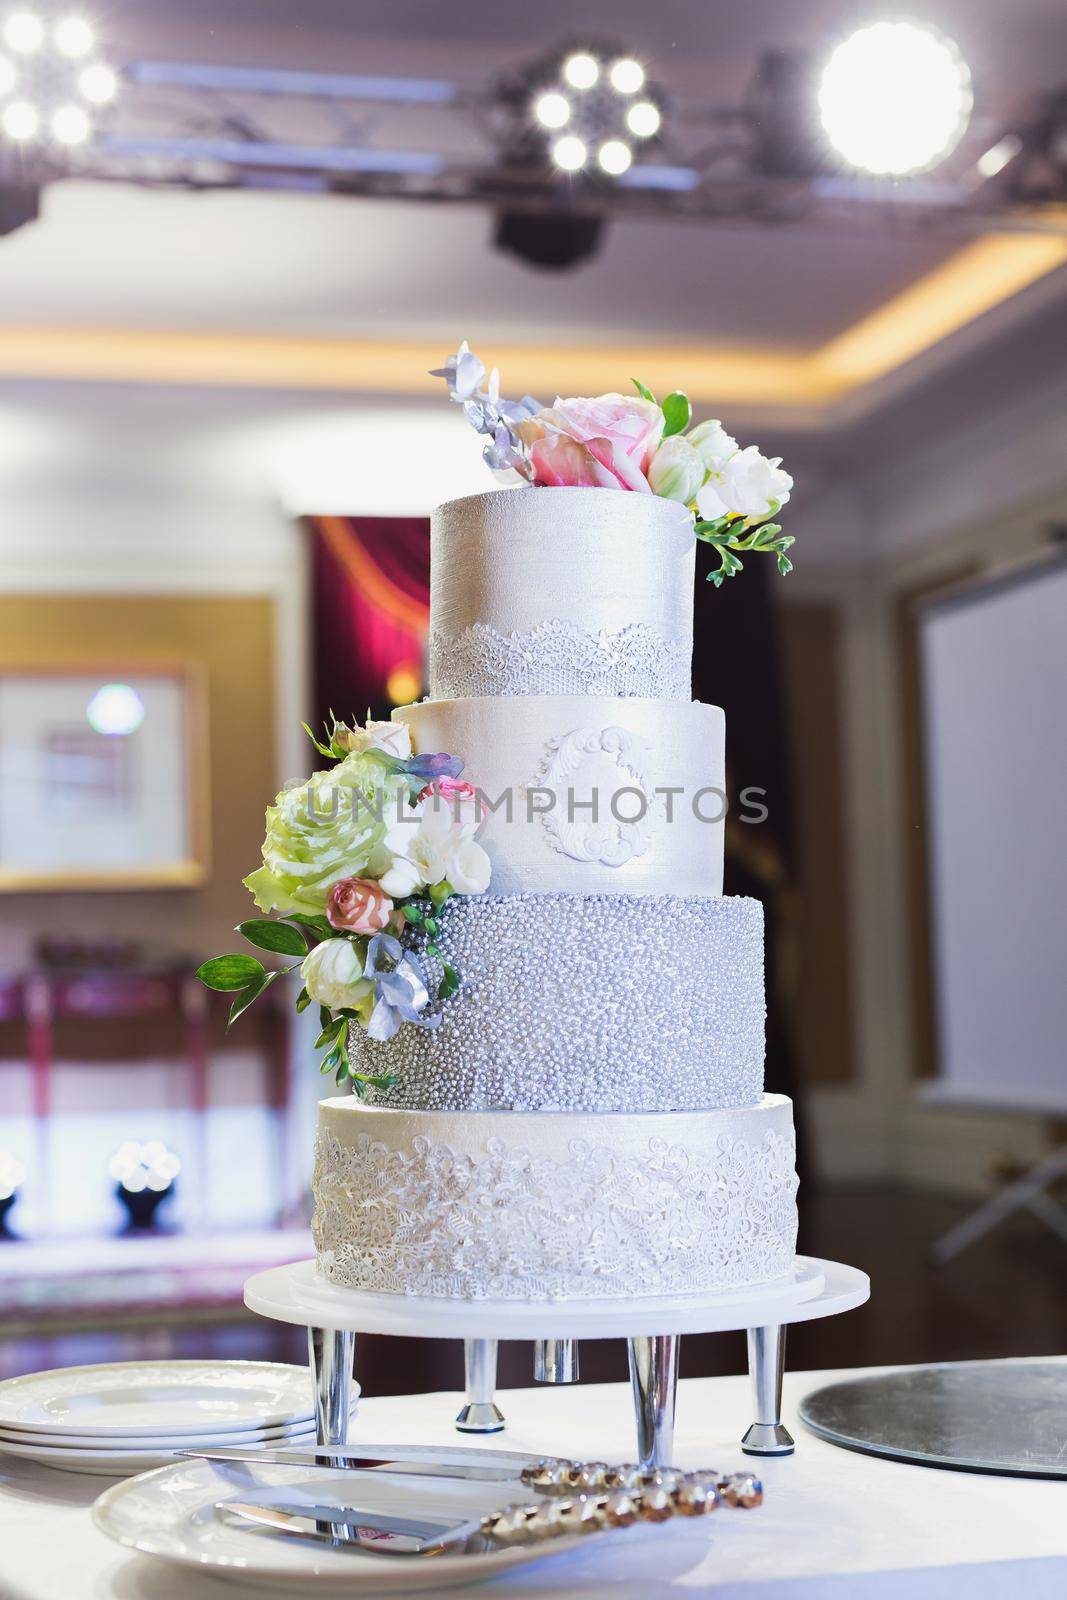 Beautiful wedding cake for the newlyweds at the wedding. A birthday cake at a banquet by StudioPeace